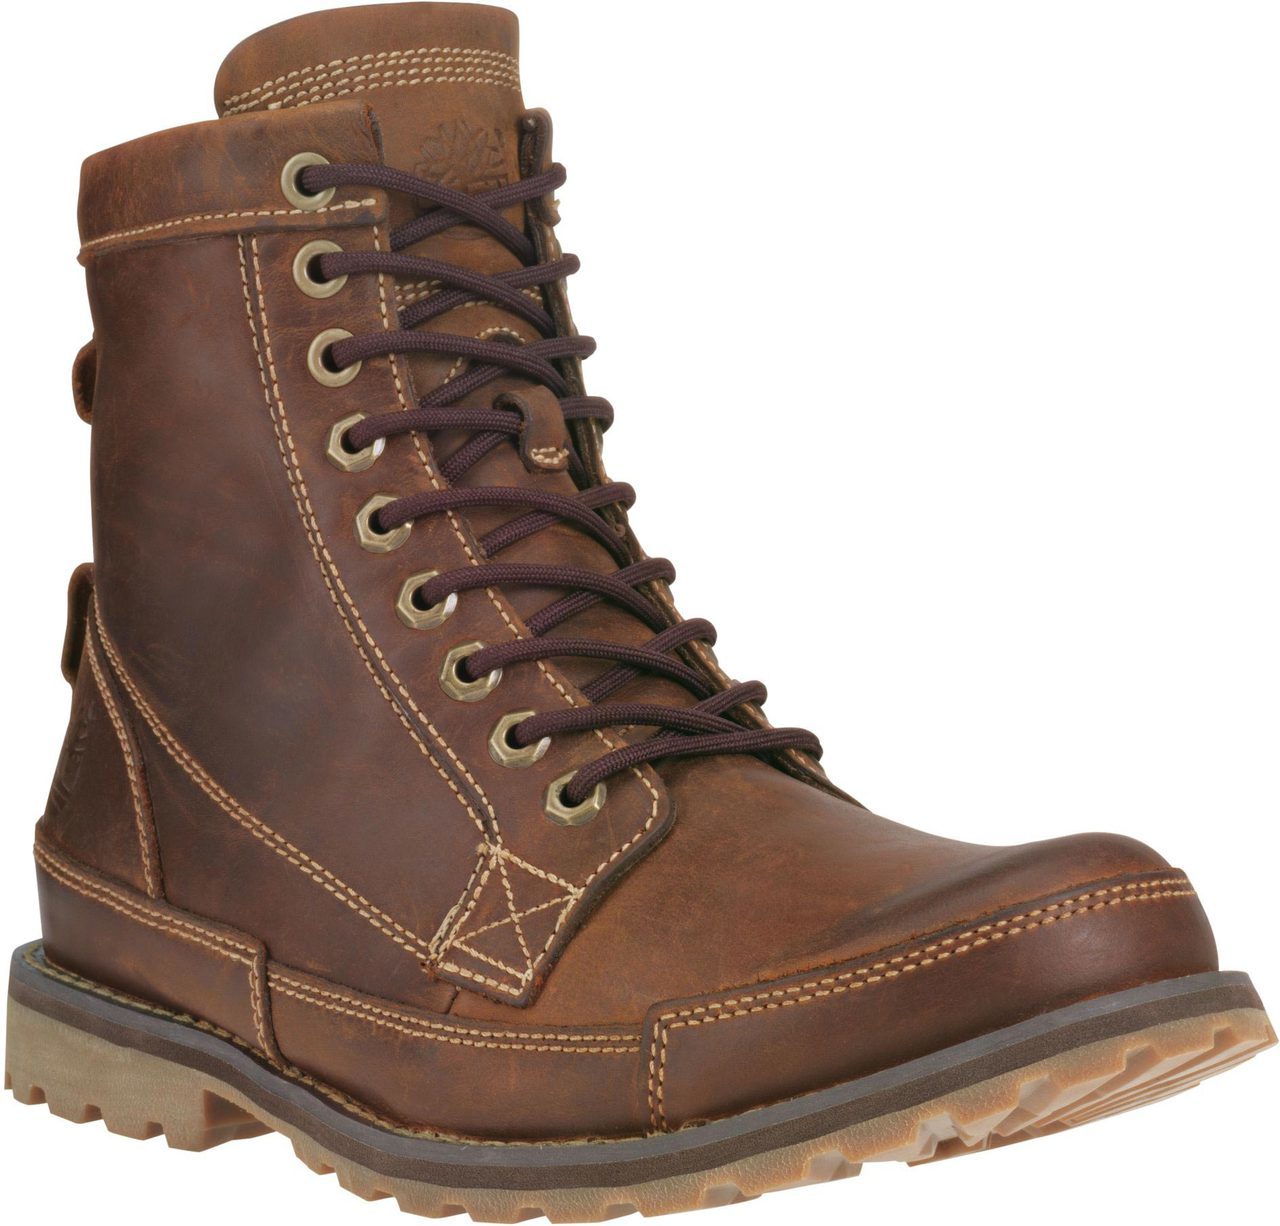 Timberland Earthkeepers Original Leather 6 Inch in Red Brown Burnished